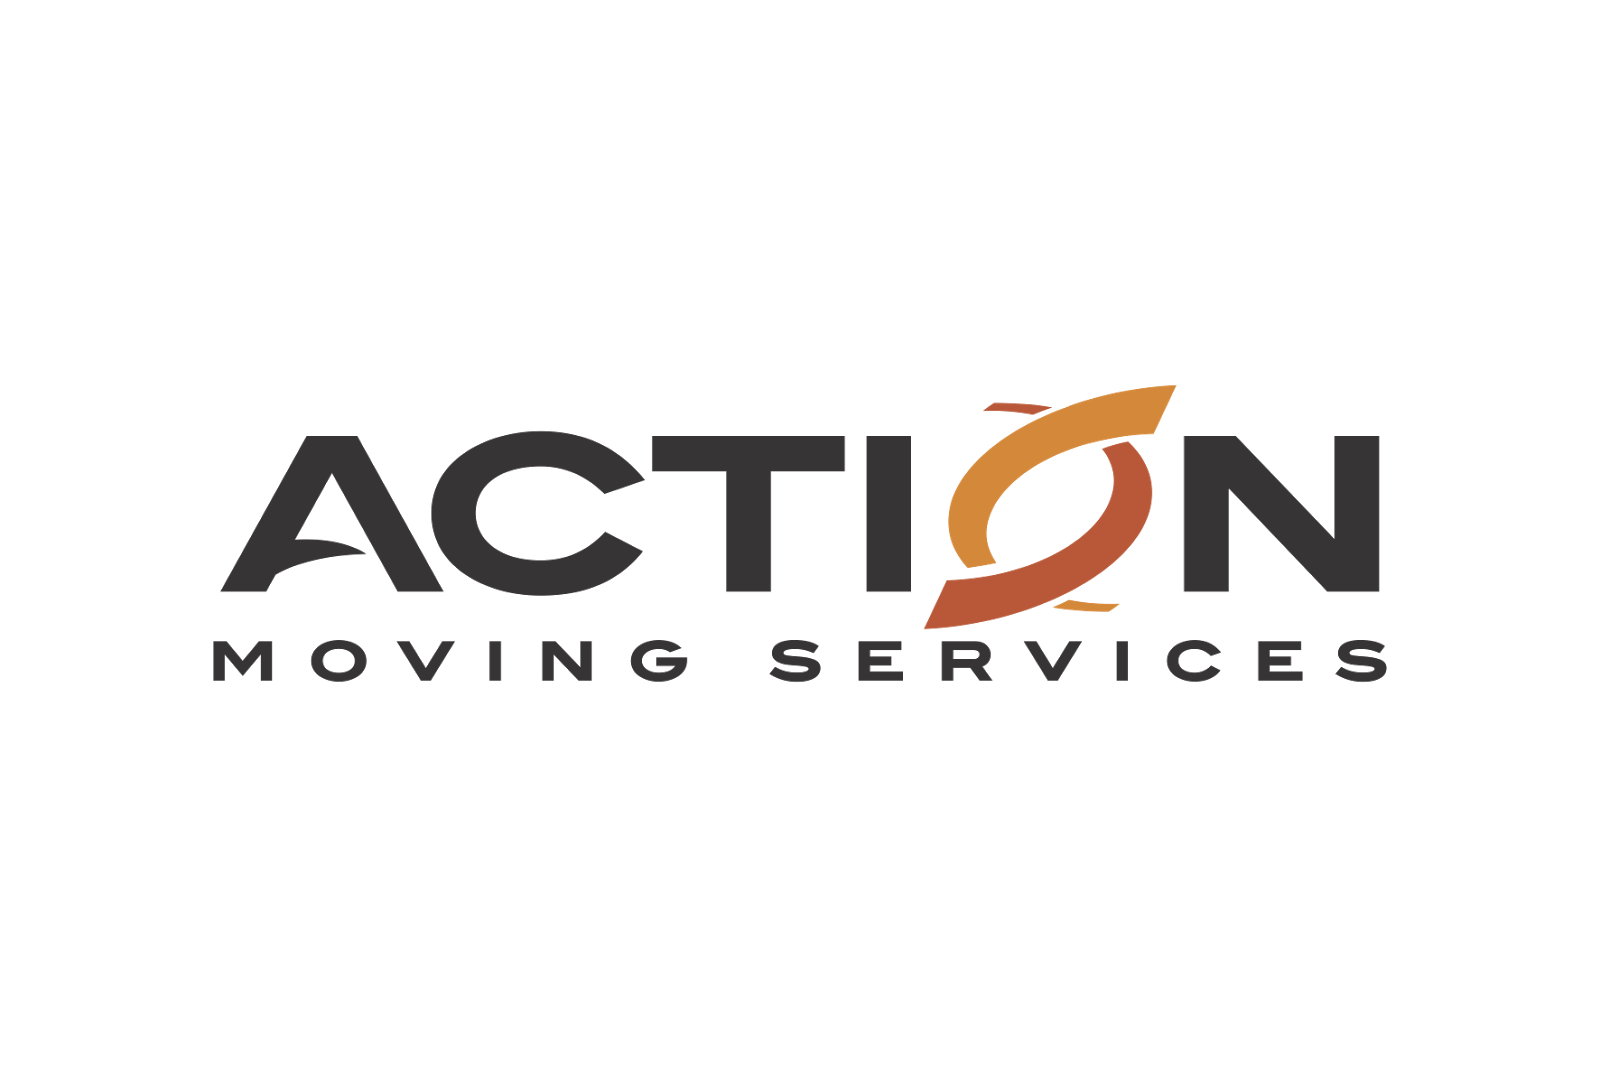 Action логотип. Action агентство. Action логотип вектор. Лого moving. Action z